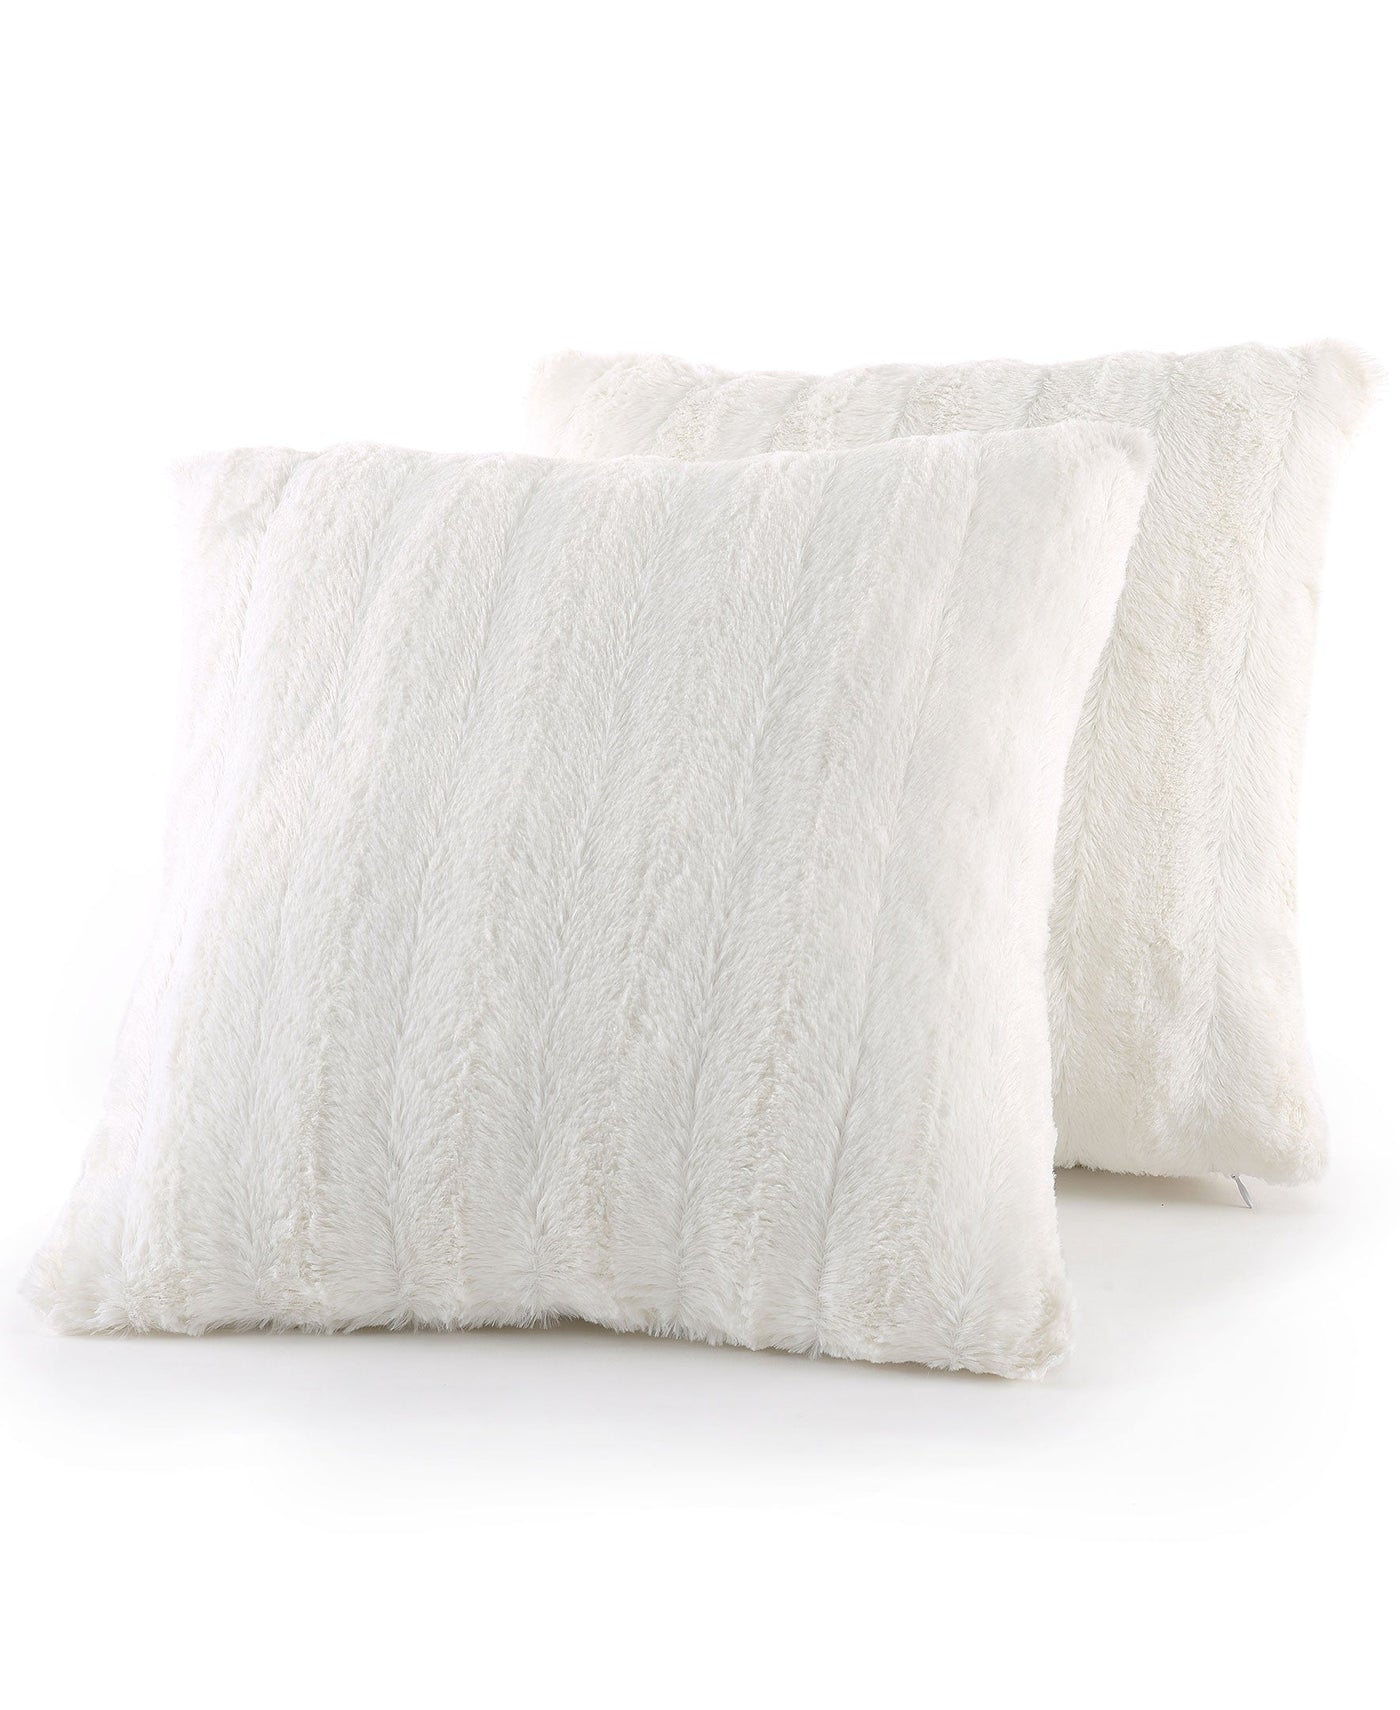 https://www.cheercollection.com/cdn/shop/products/cheer-collection-faux-fur-throw-pillows-set-of-2-decorative-couch-pillows-26-x-26-660195_1400x.jpg?v=1671780487